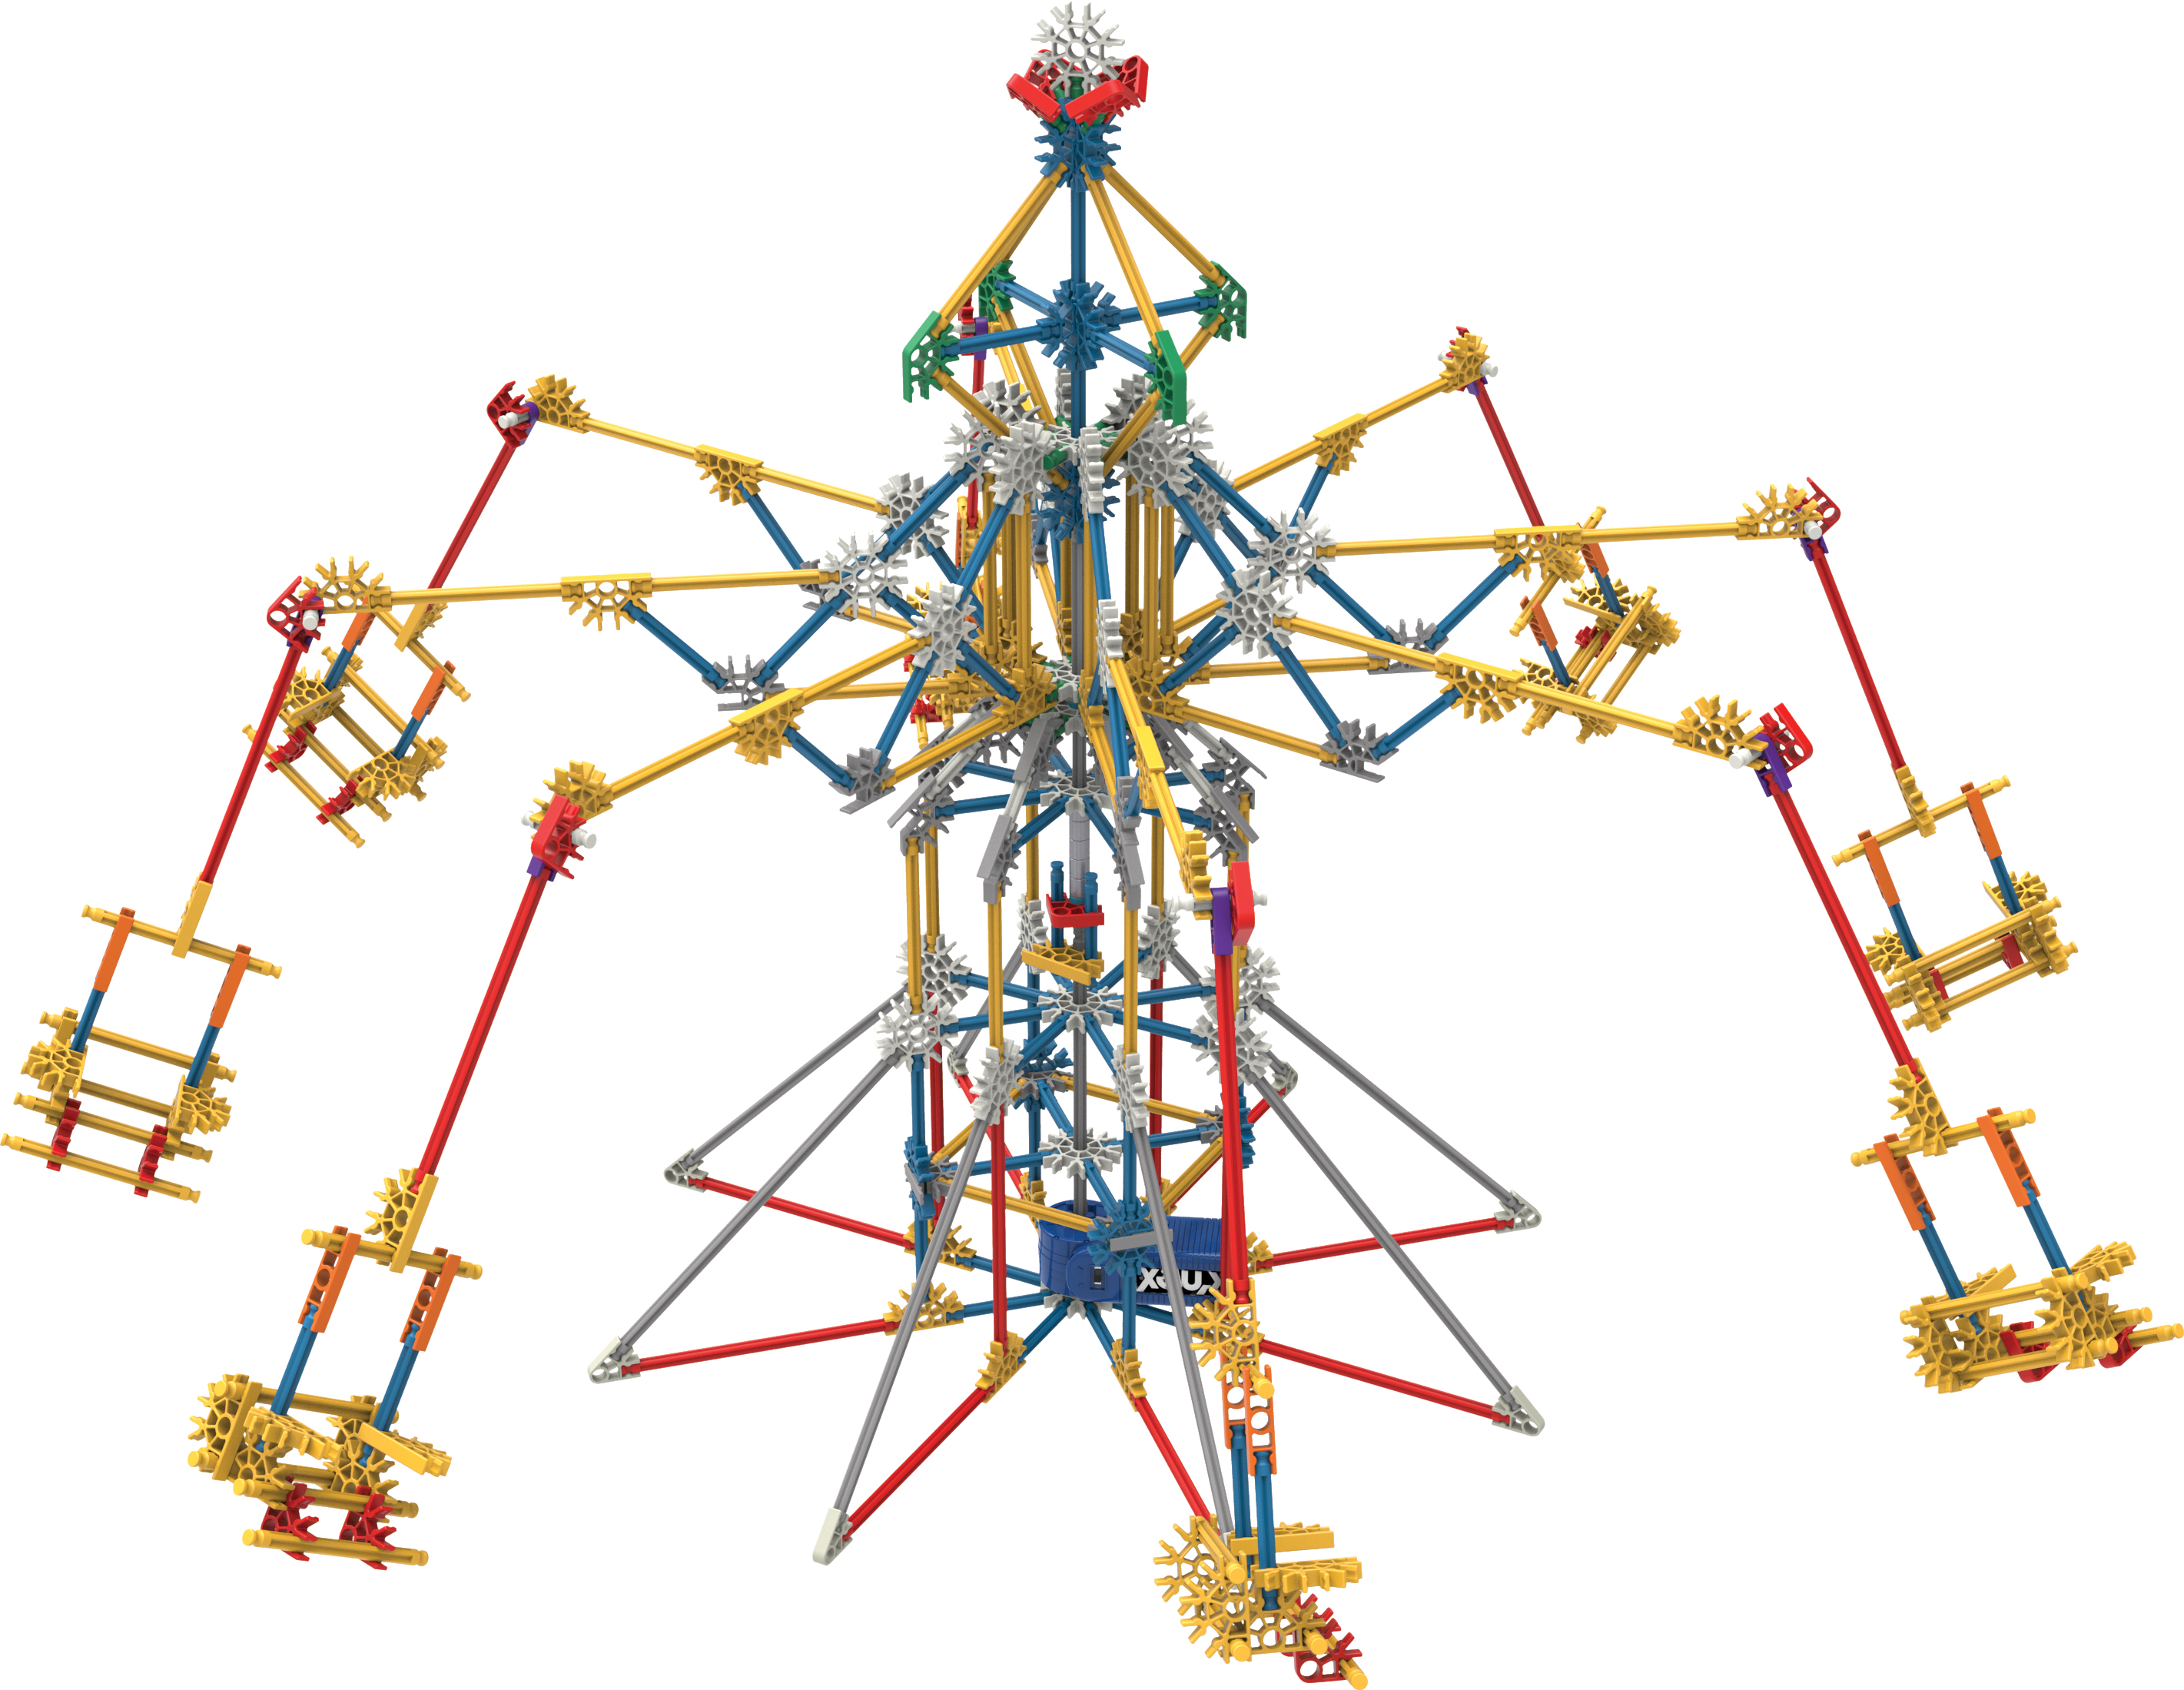 K'NEX Thrill Rides - 3-in-1 Classic Amusement Park Building Set - 744 Pieces - Ages 9 Engineering Education Toy - image 2 of 6